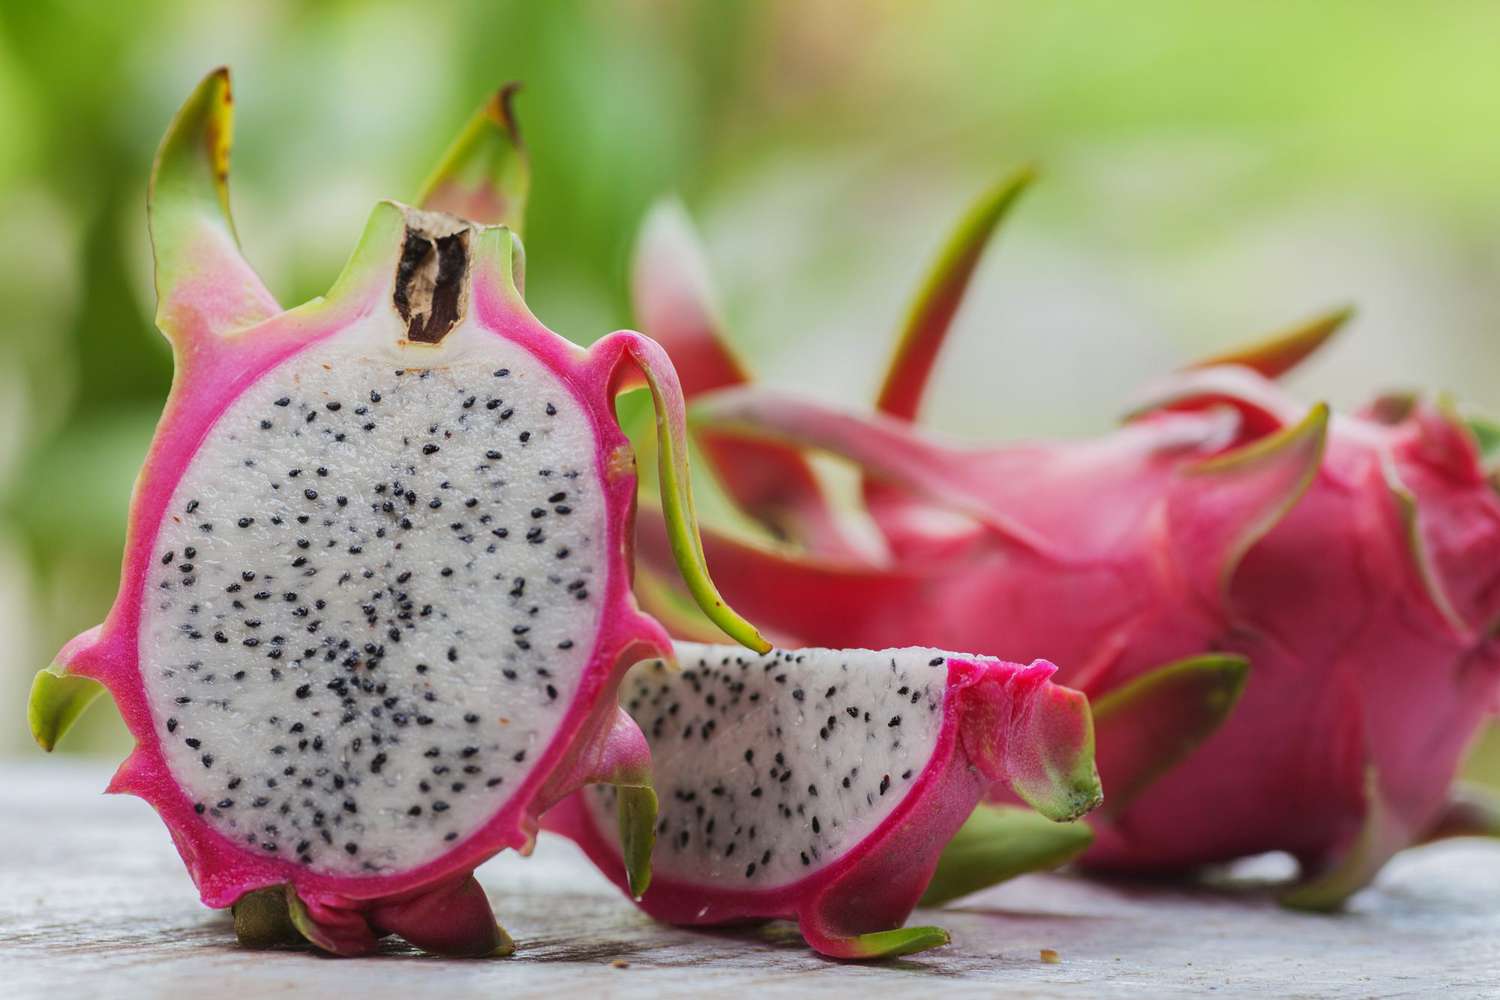 how-to-eat-dragon-fruit-can-i-eat-the-red